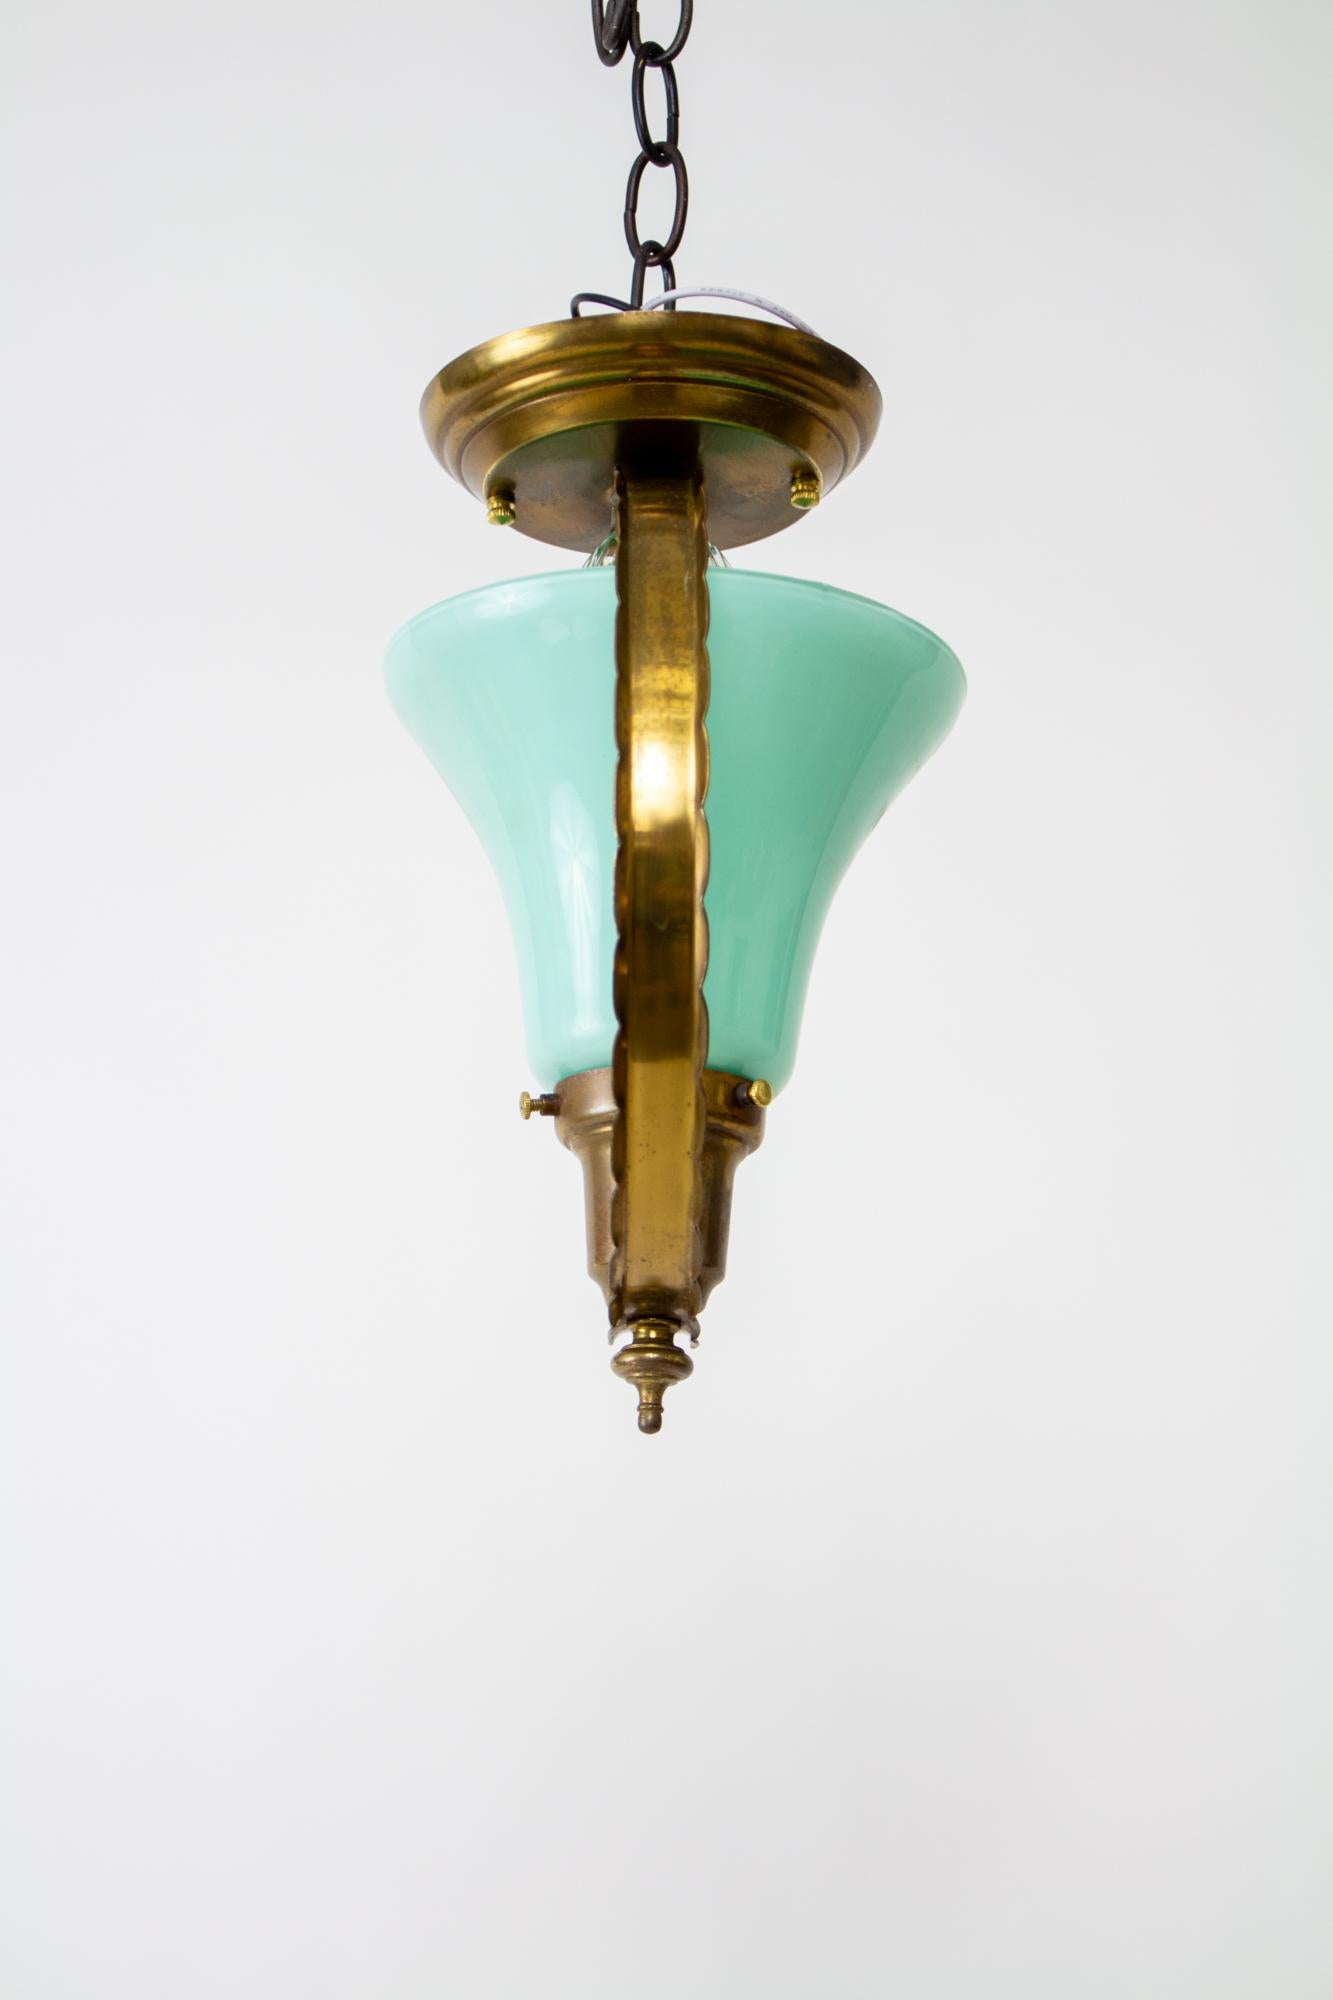 American Mid 20th Century Hall Pendant with Turquoise Glass